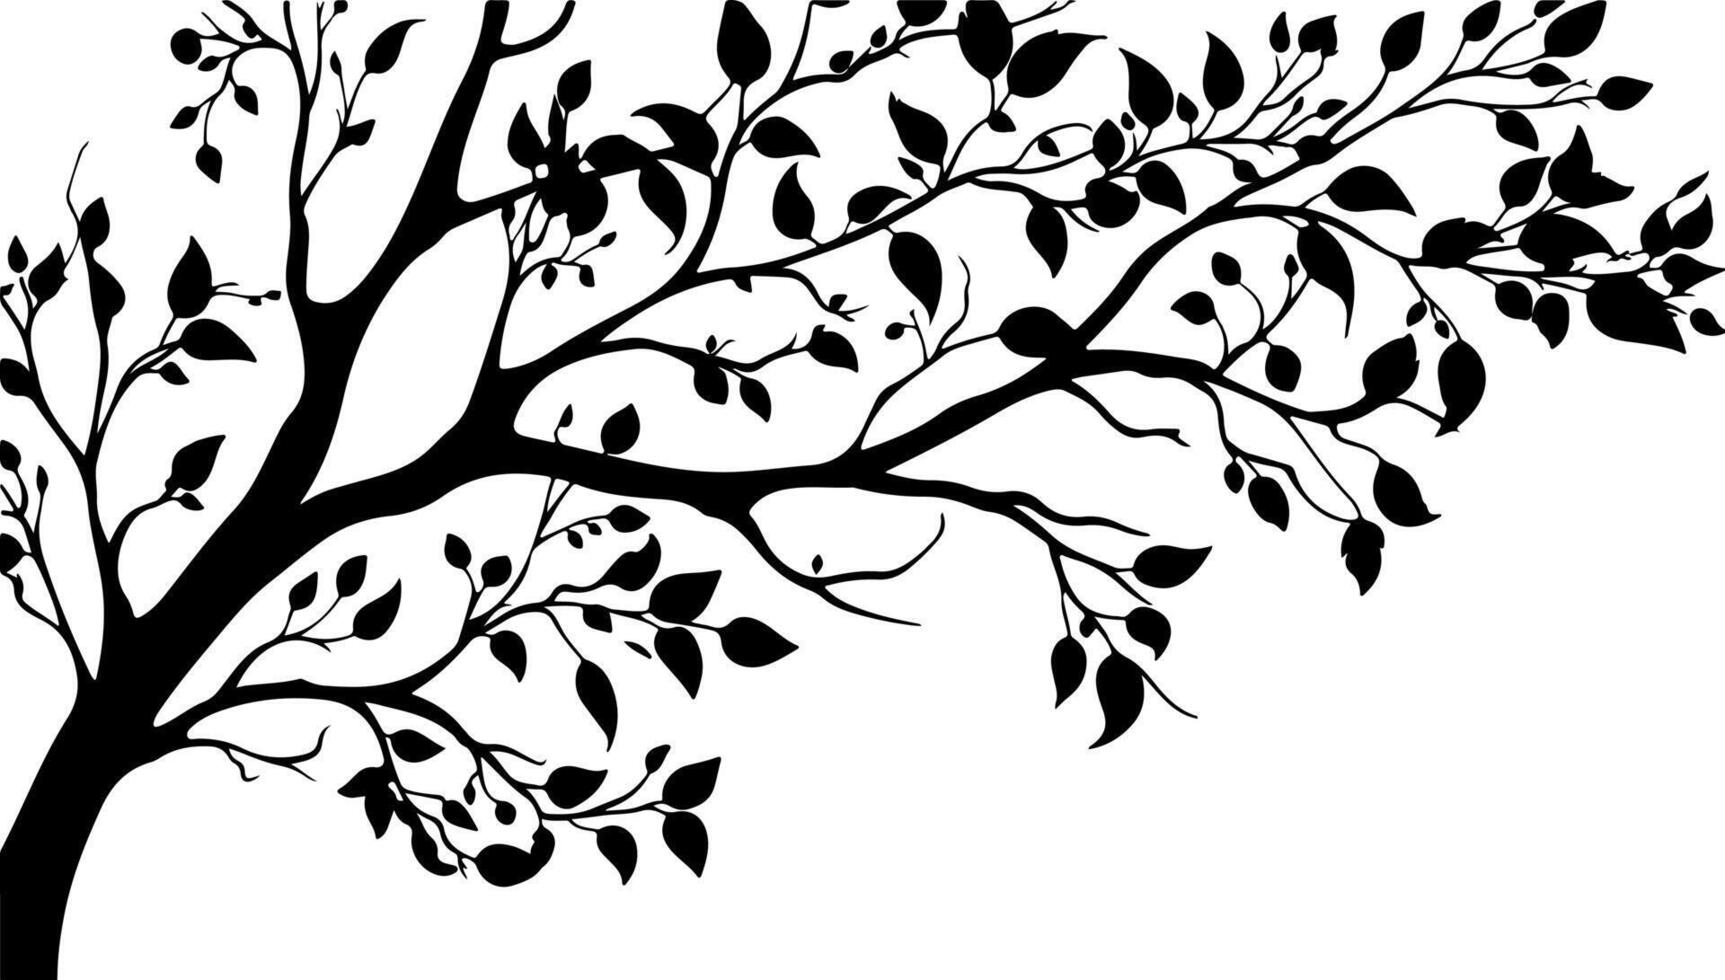 Tree branches silhouette isolated on white background. illustration forest design and element landscape season. Autumn clip art and decoration abstract outdoor vector